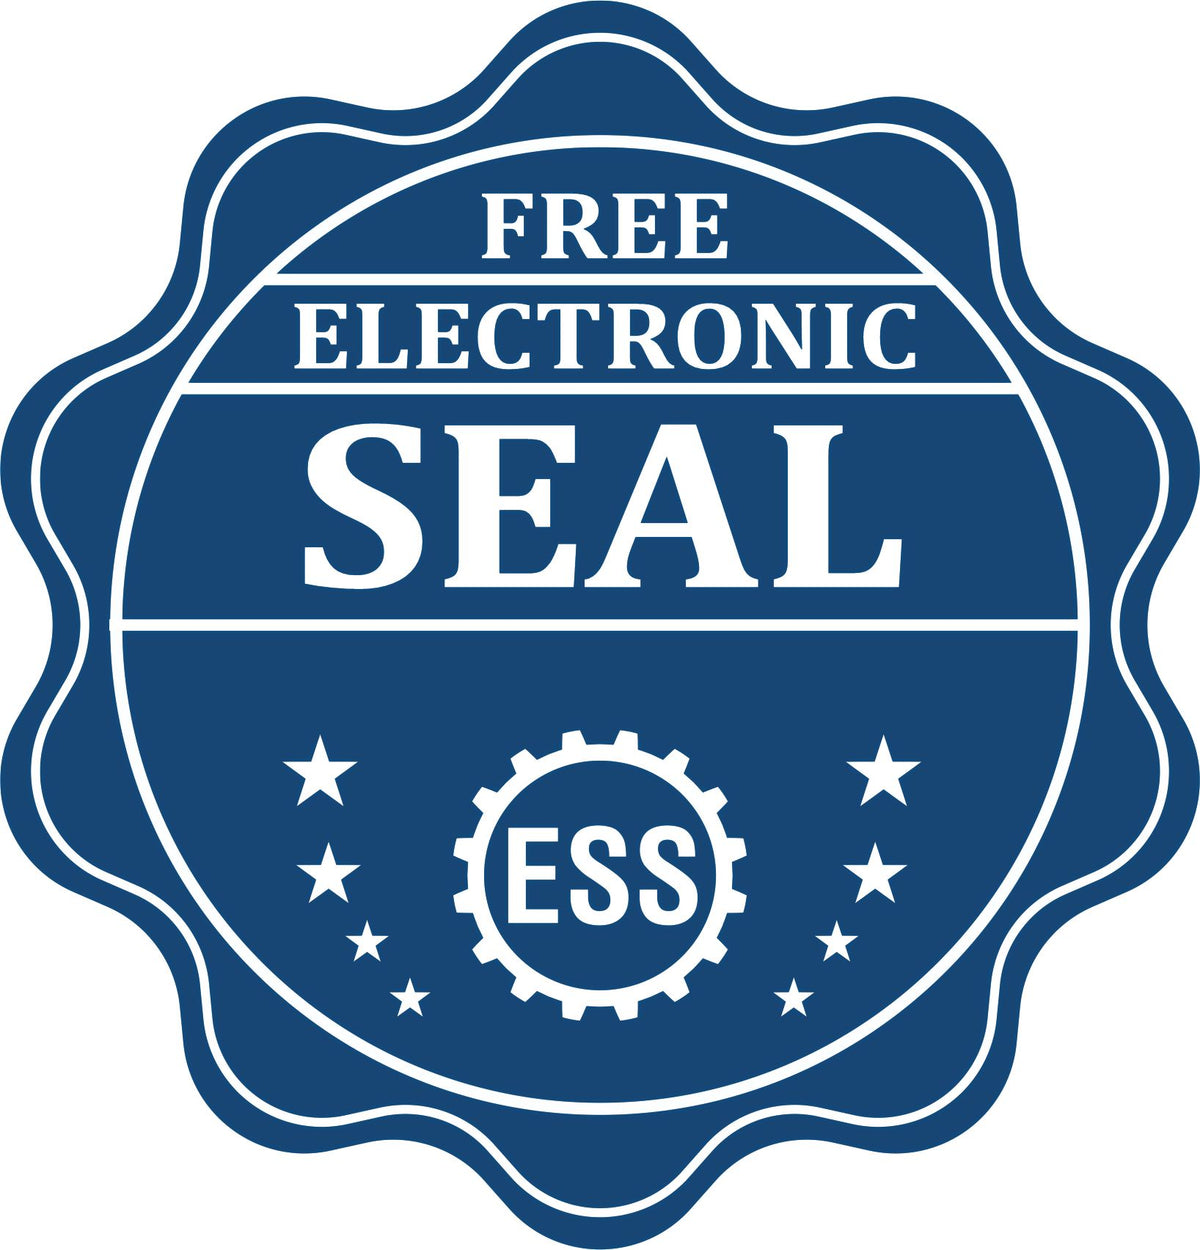 A badge showing a free electronic seal for the Slim Pre-Inked Minnesota Landscape Architect Seal Stamp with stars and the ESS gear on the emblem.